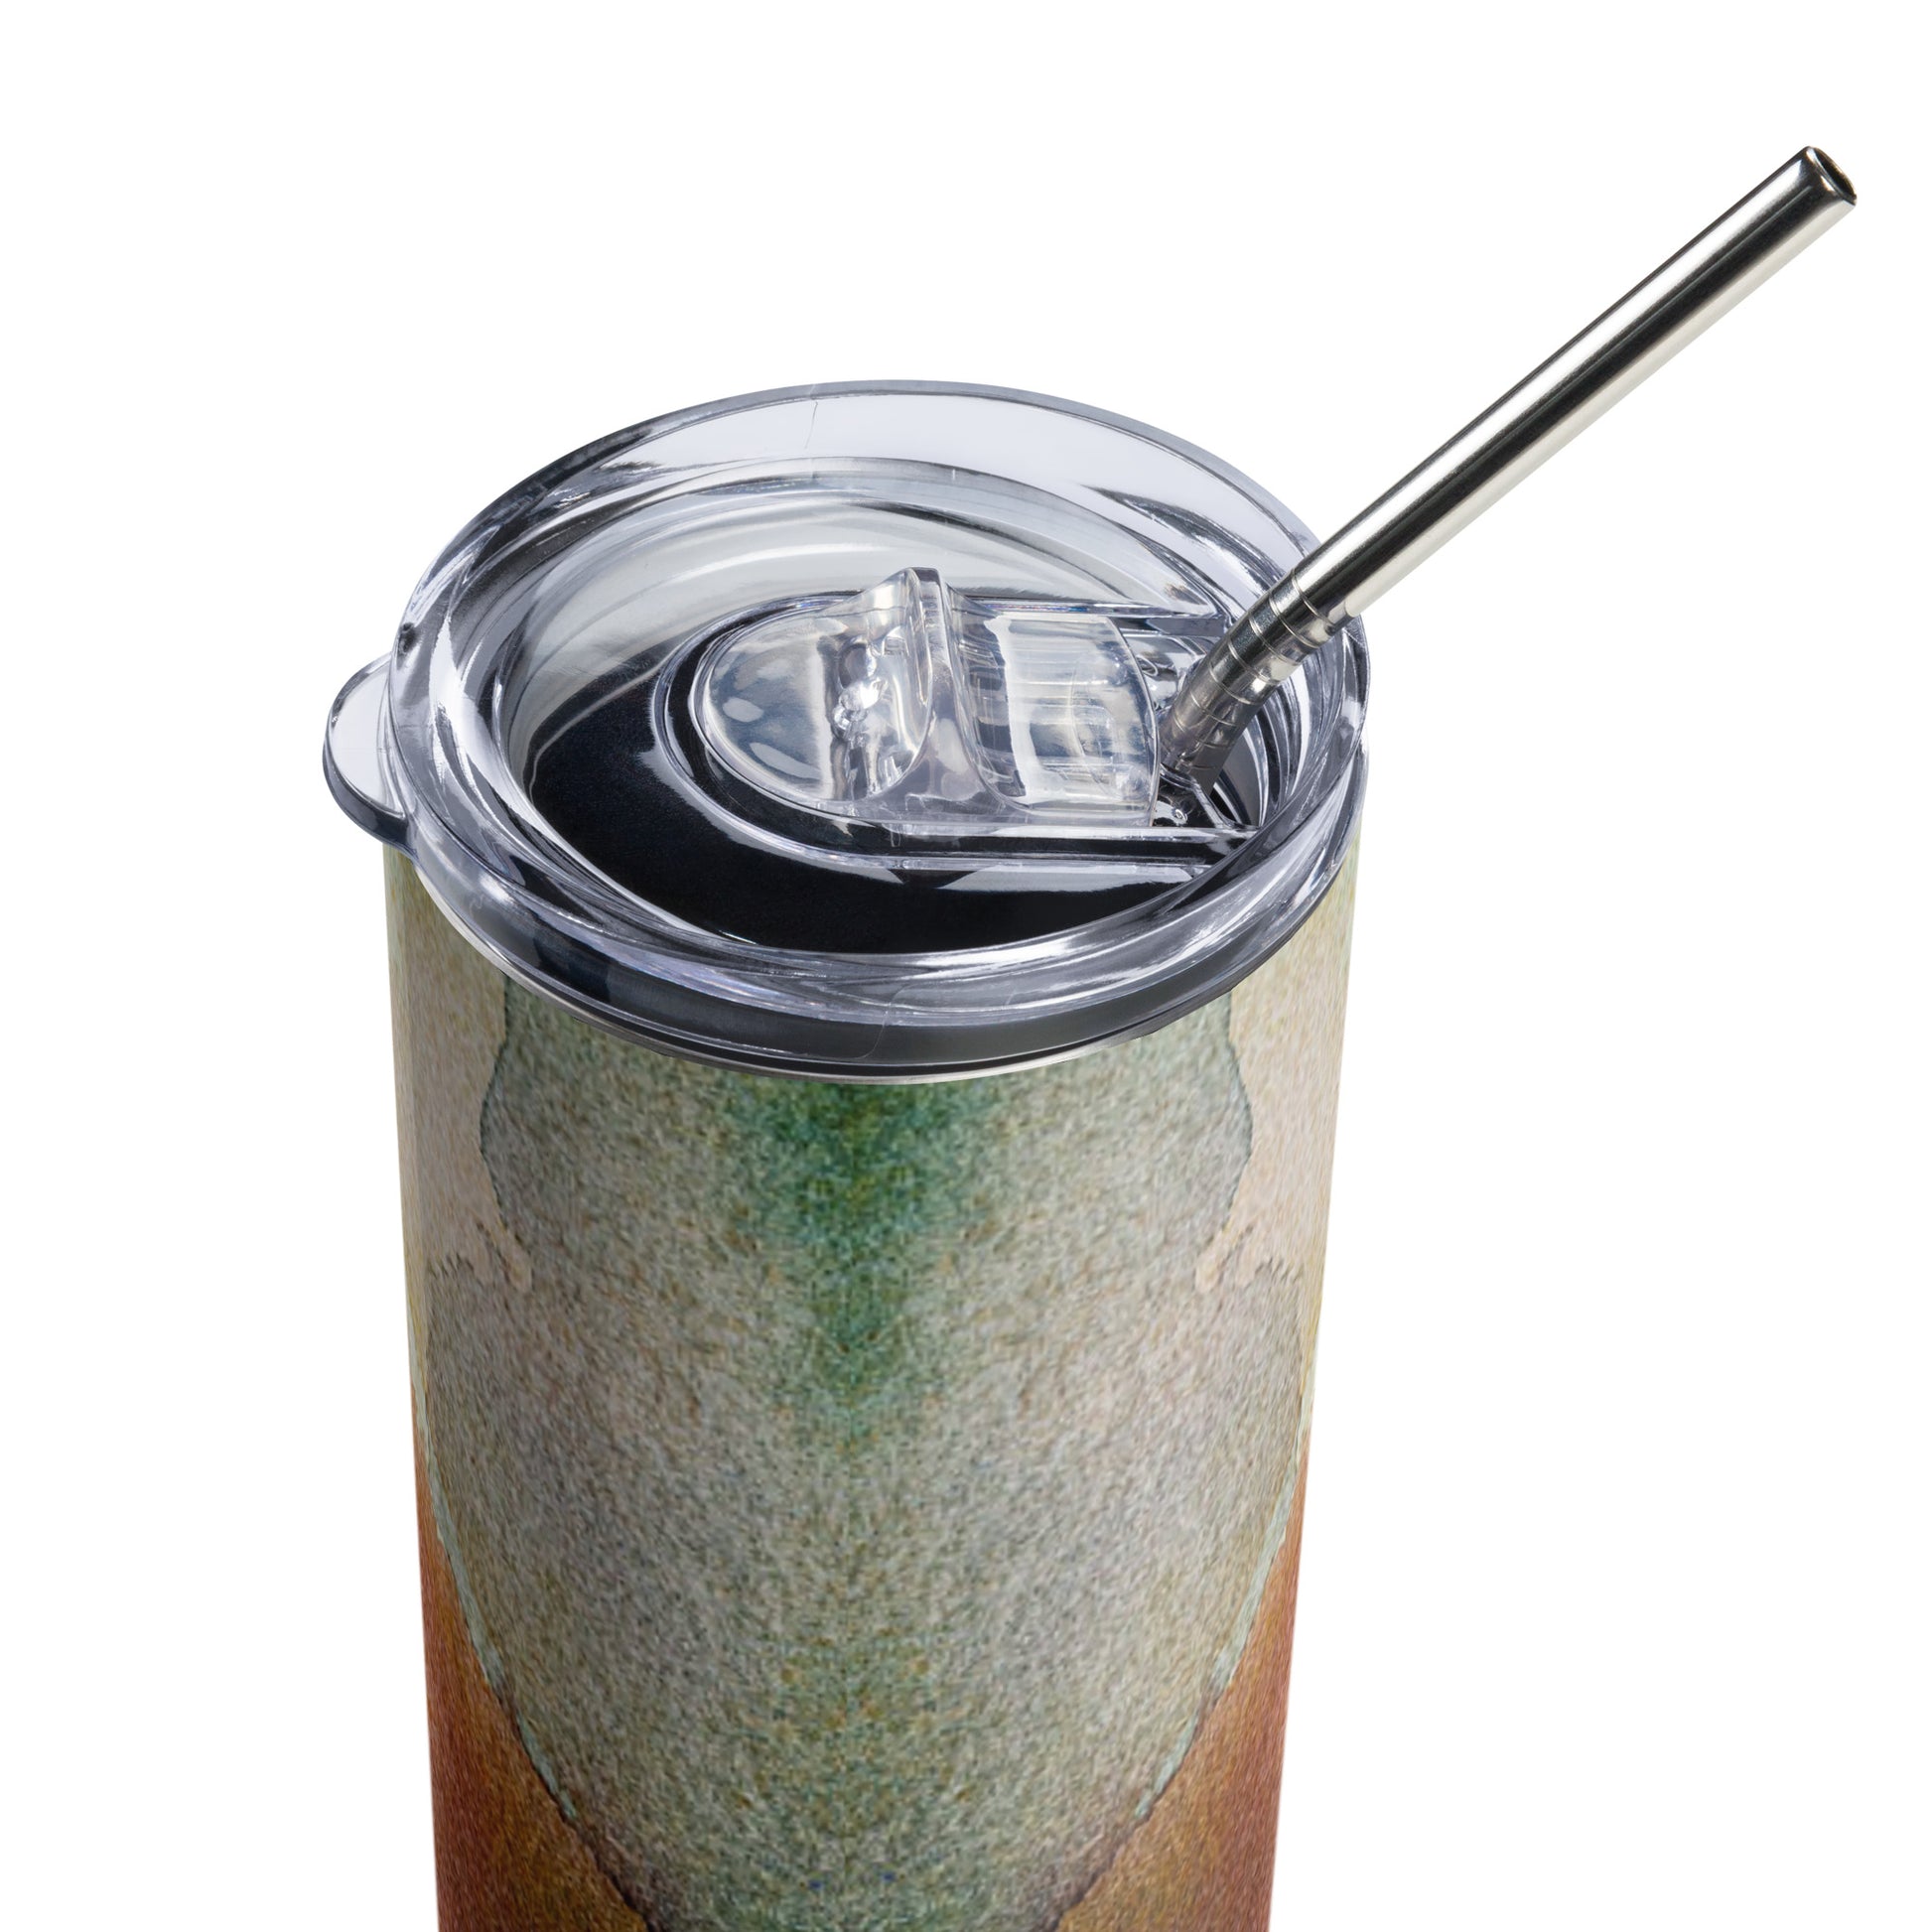 Mireille Fine Art, resuable stainless steel tumbler, abstract print 20 oz tumbler with metal straw